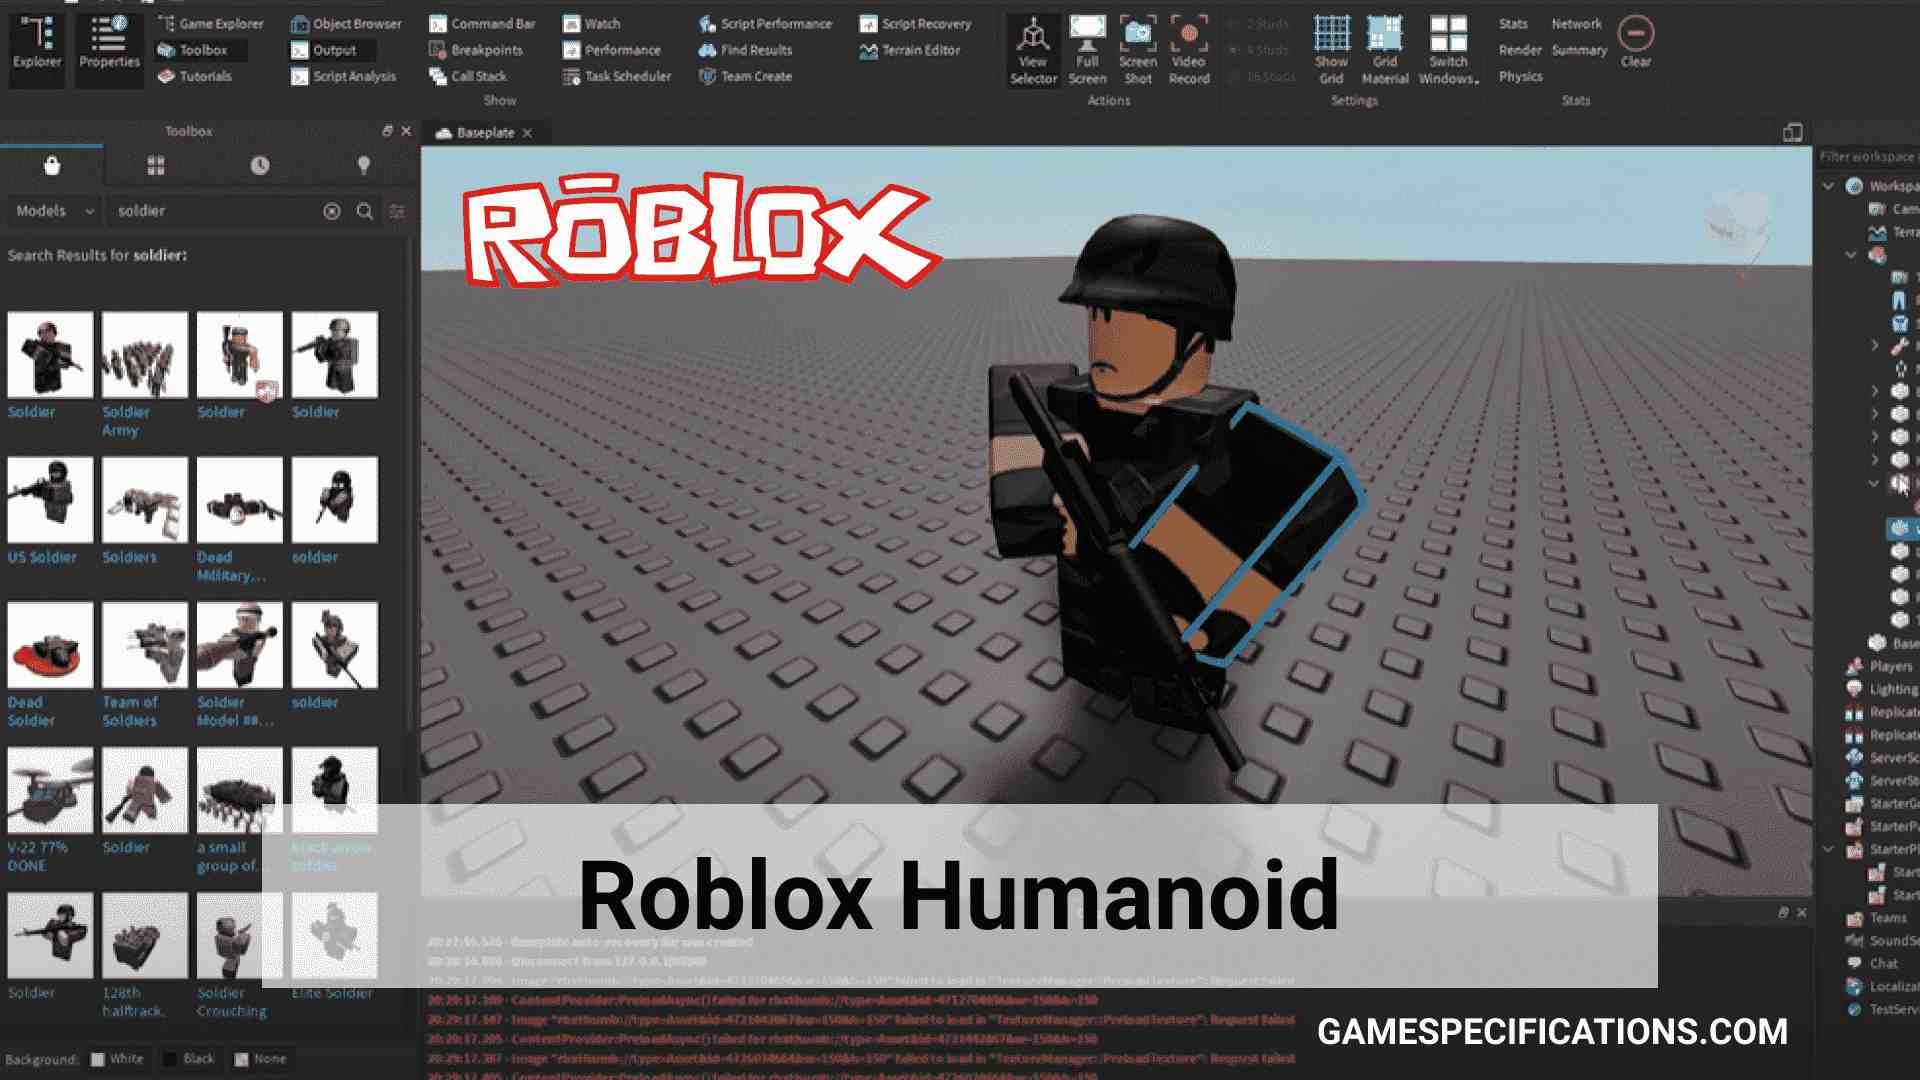 Roblox Humanoid Complete Guide On Humanoid Coding 2021 Game Specifications - how to move roblox limbs